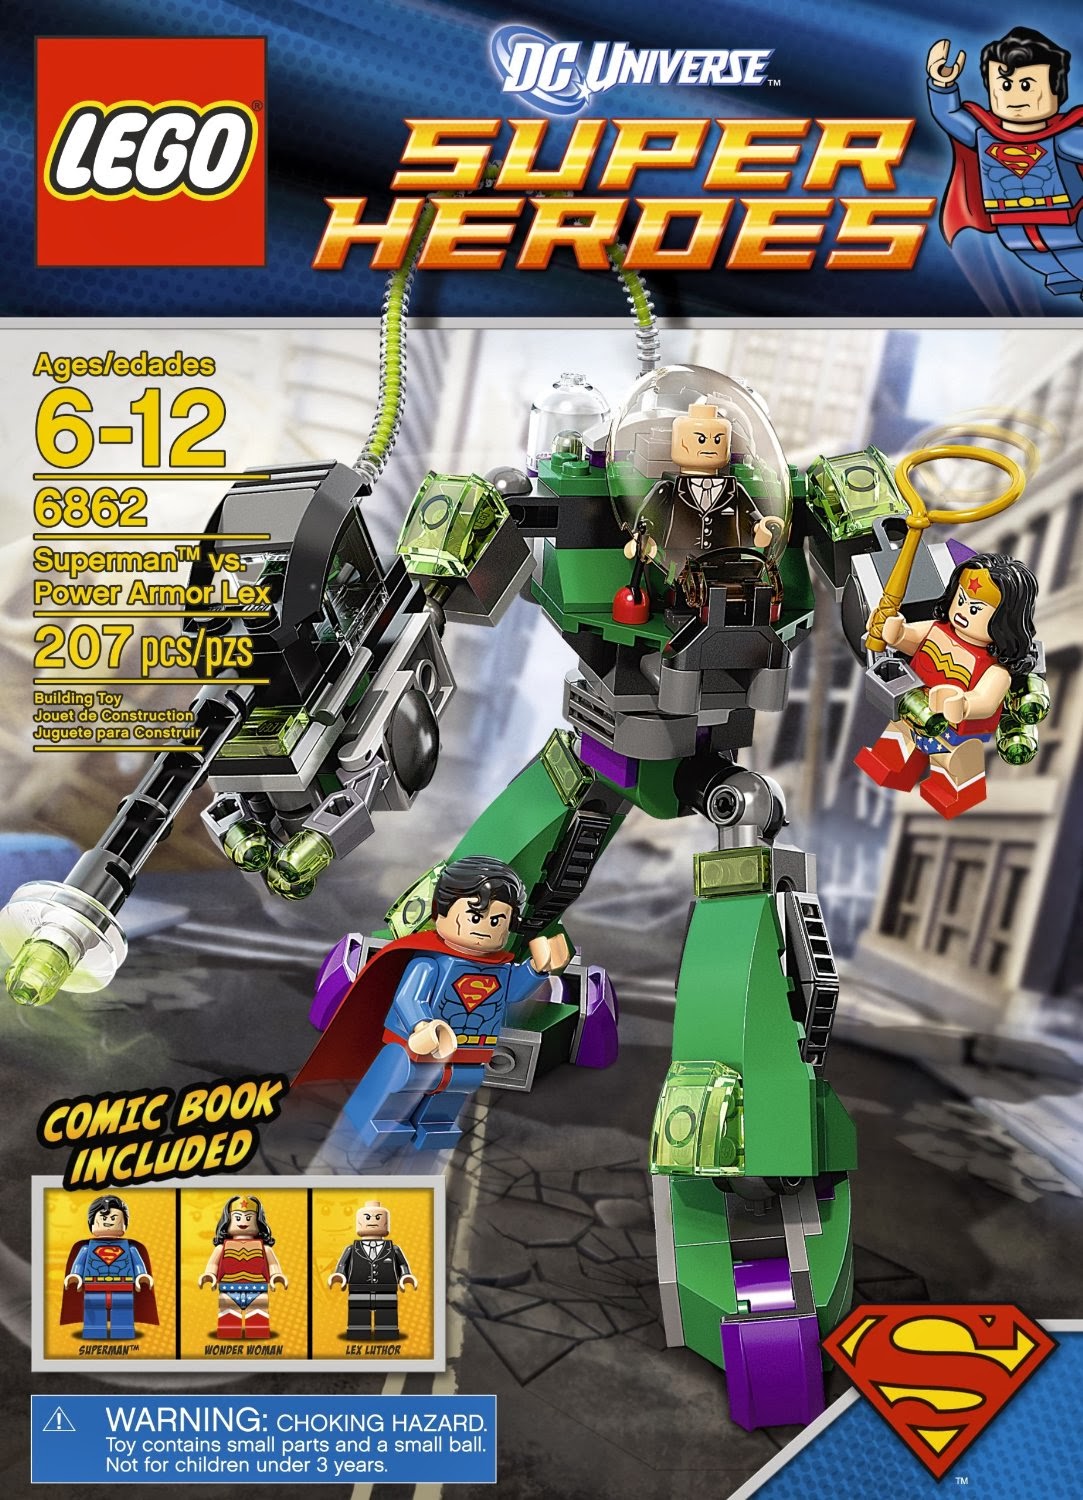 Extreme Couponing Mommy: ***HOT*** LEGO Super Heroes Amazon Deals